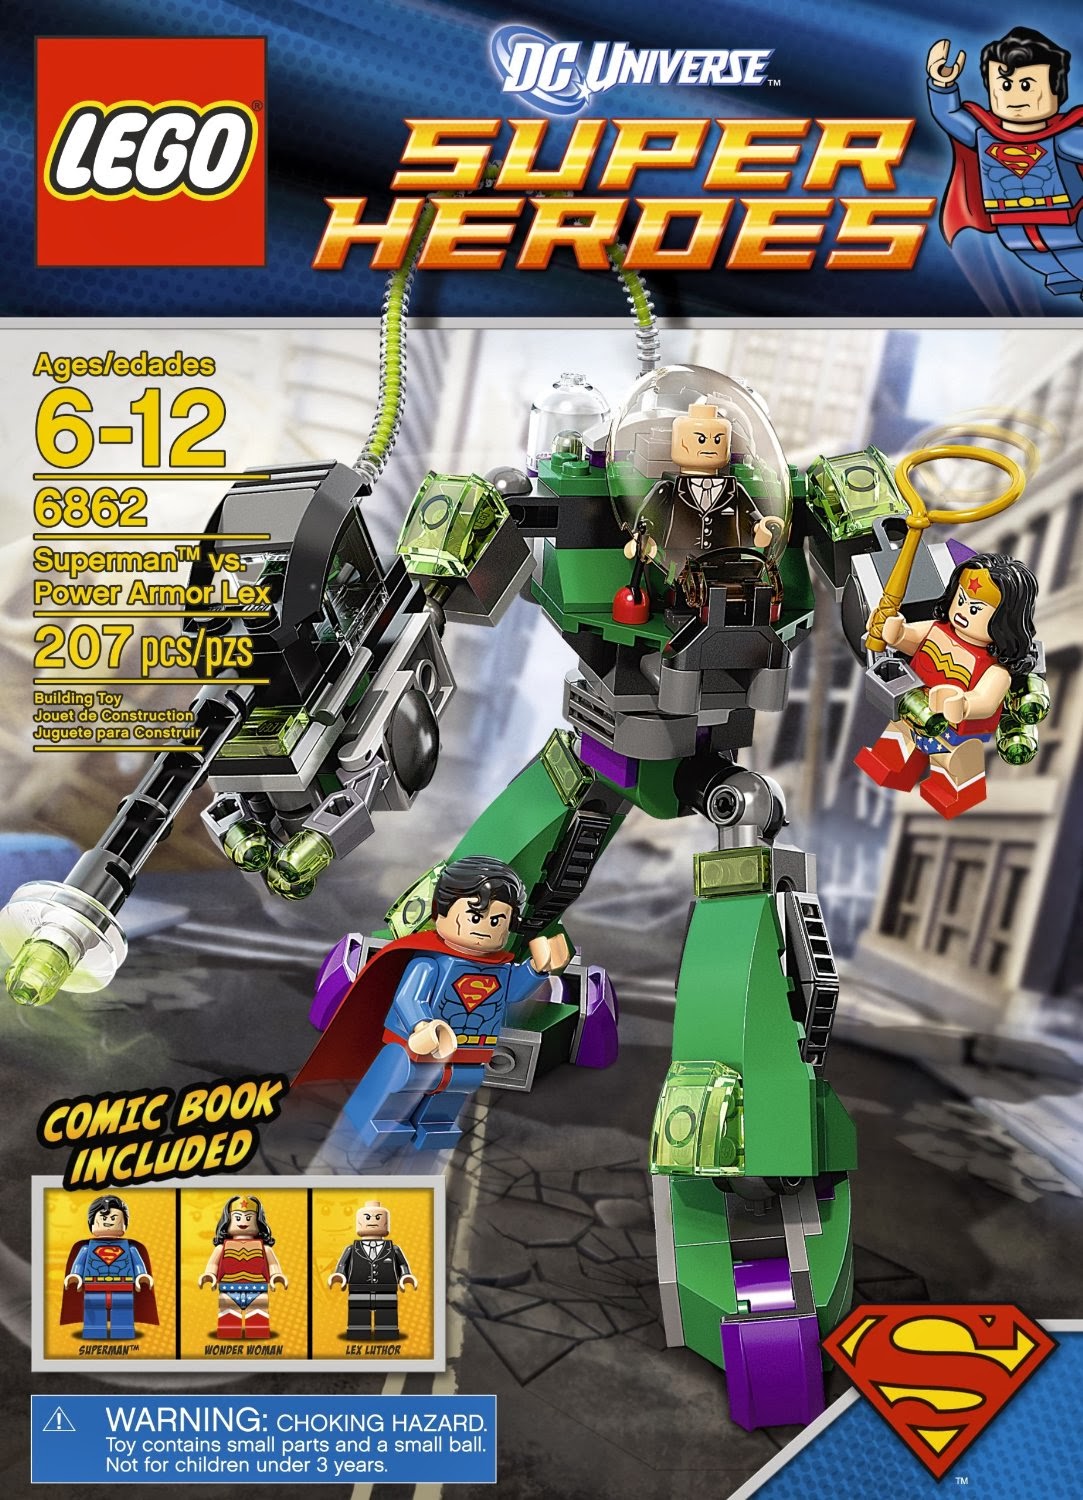 Extreme Couponing Mommy: ***HOT*** LEGO Super Heroes Amazon Deals